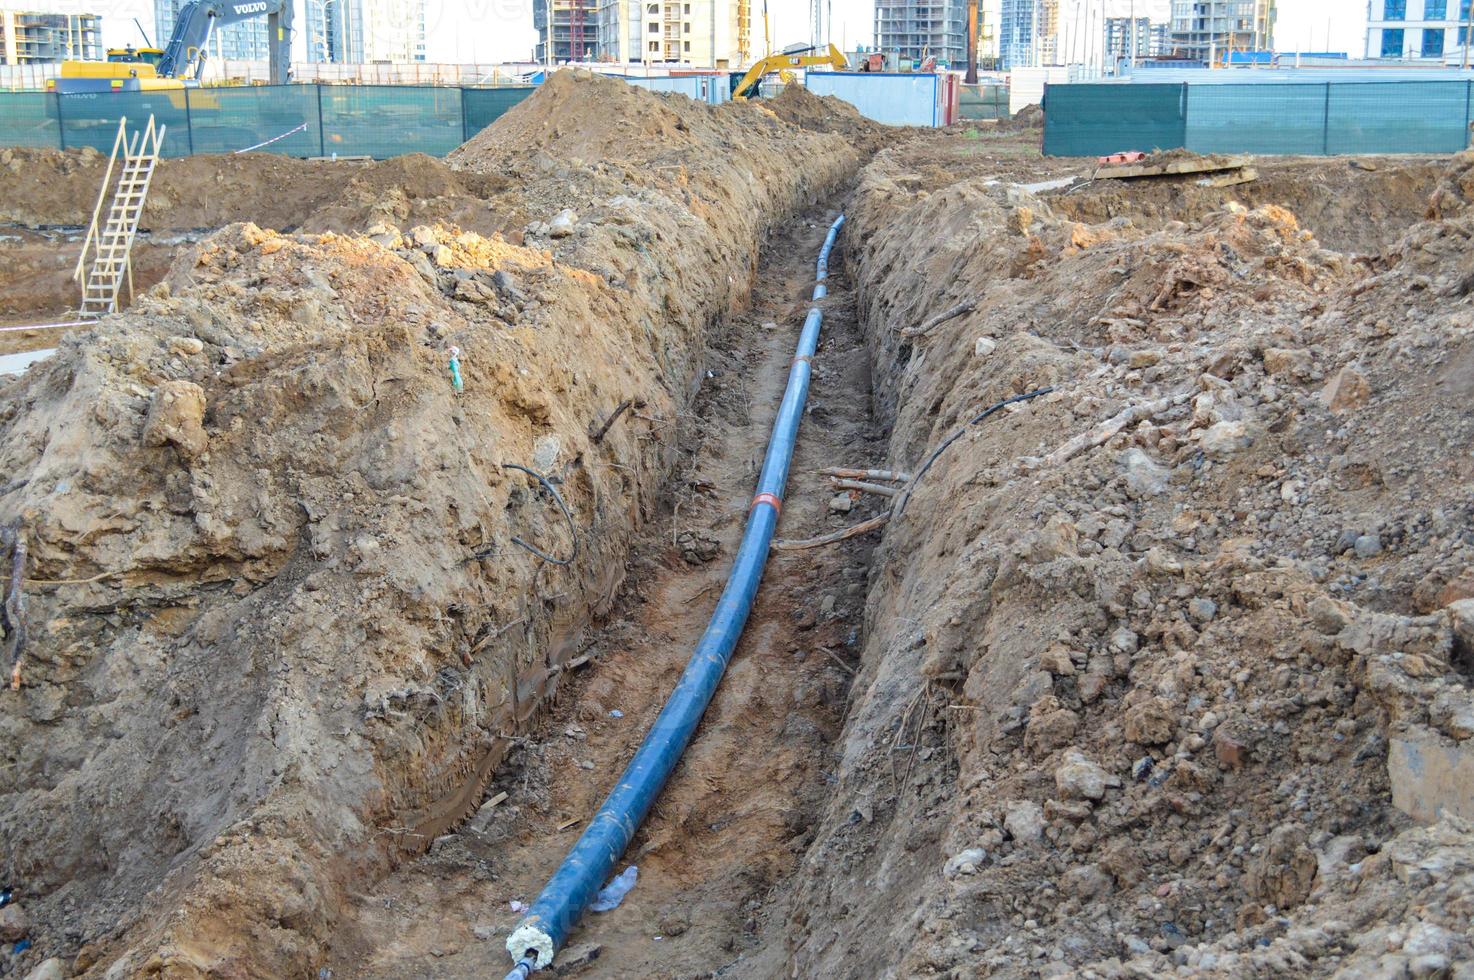 construction of underground communications. production of water runoff, sewerage system for waste disposal of a multi-storey building. the blue hard cable is buried underground photo